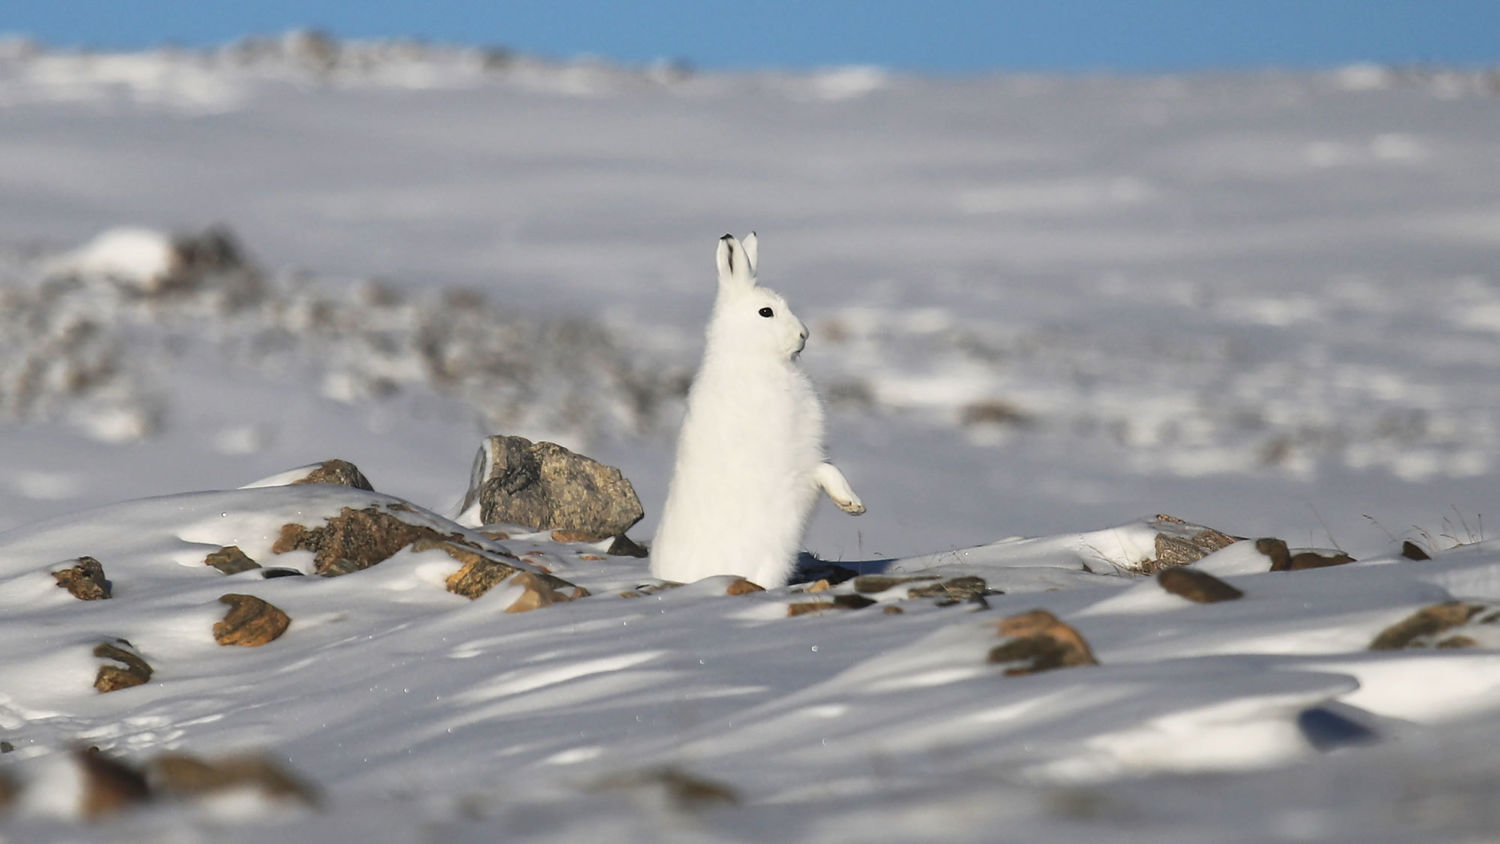 Warming Signs: How Diminished Snow Cover Puts Species in Peril